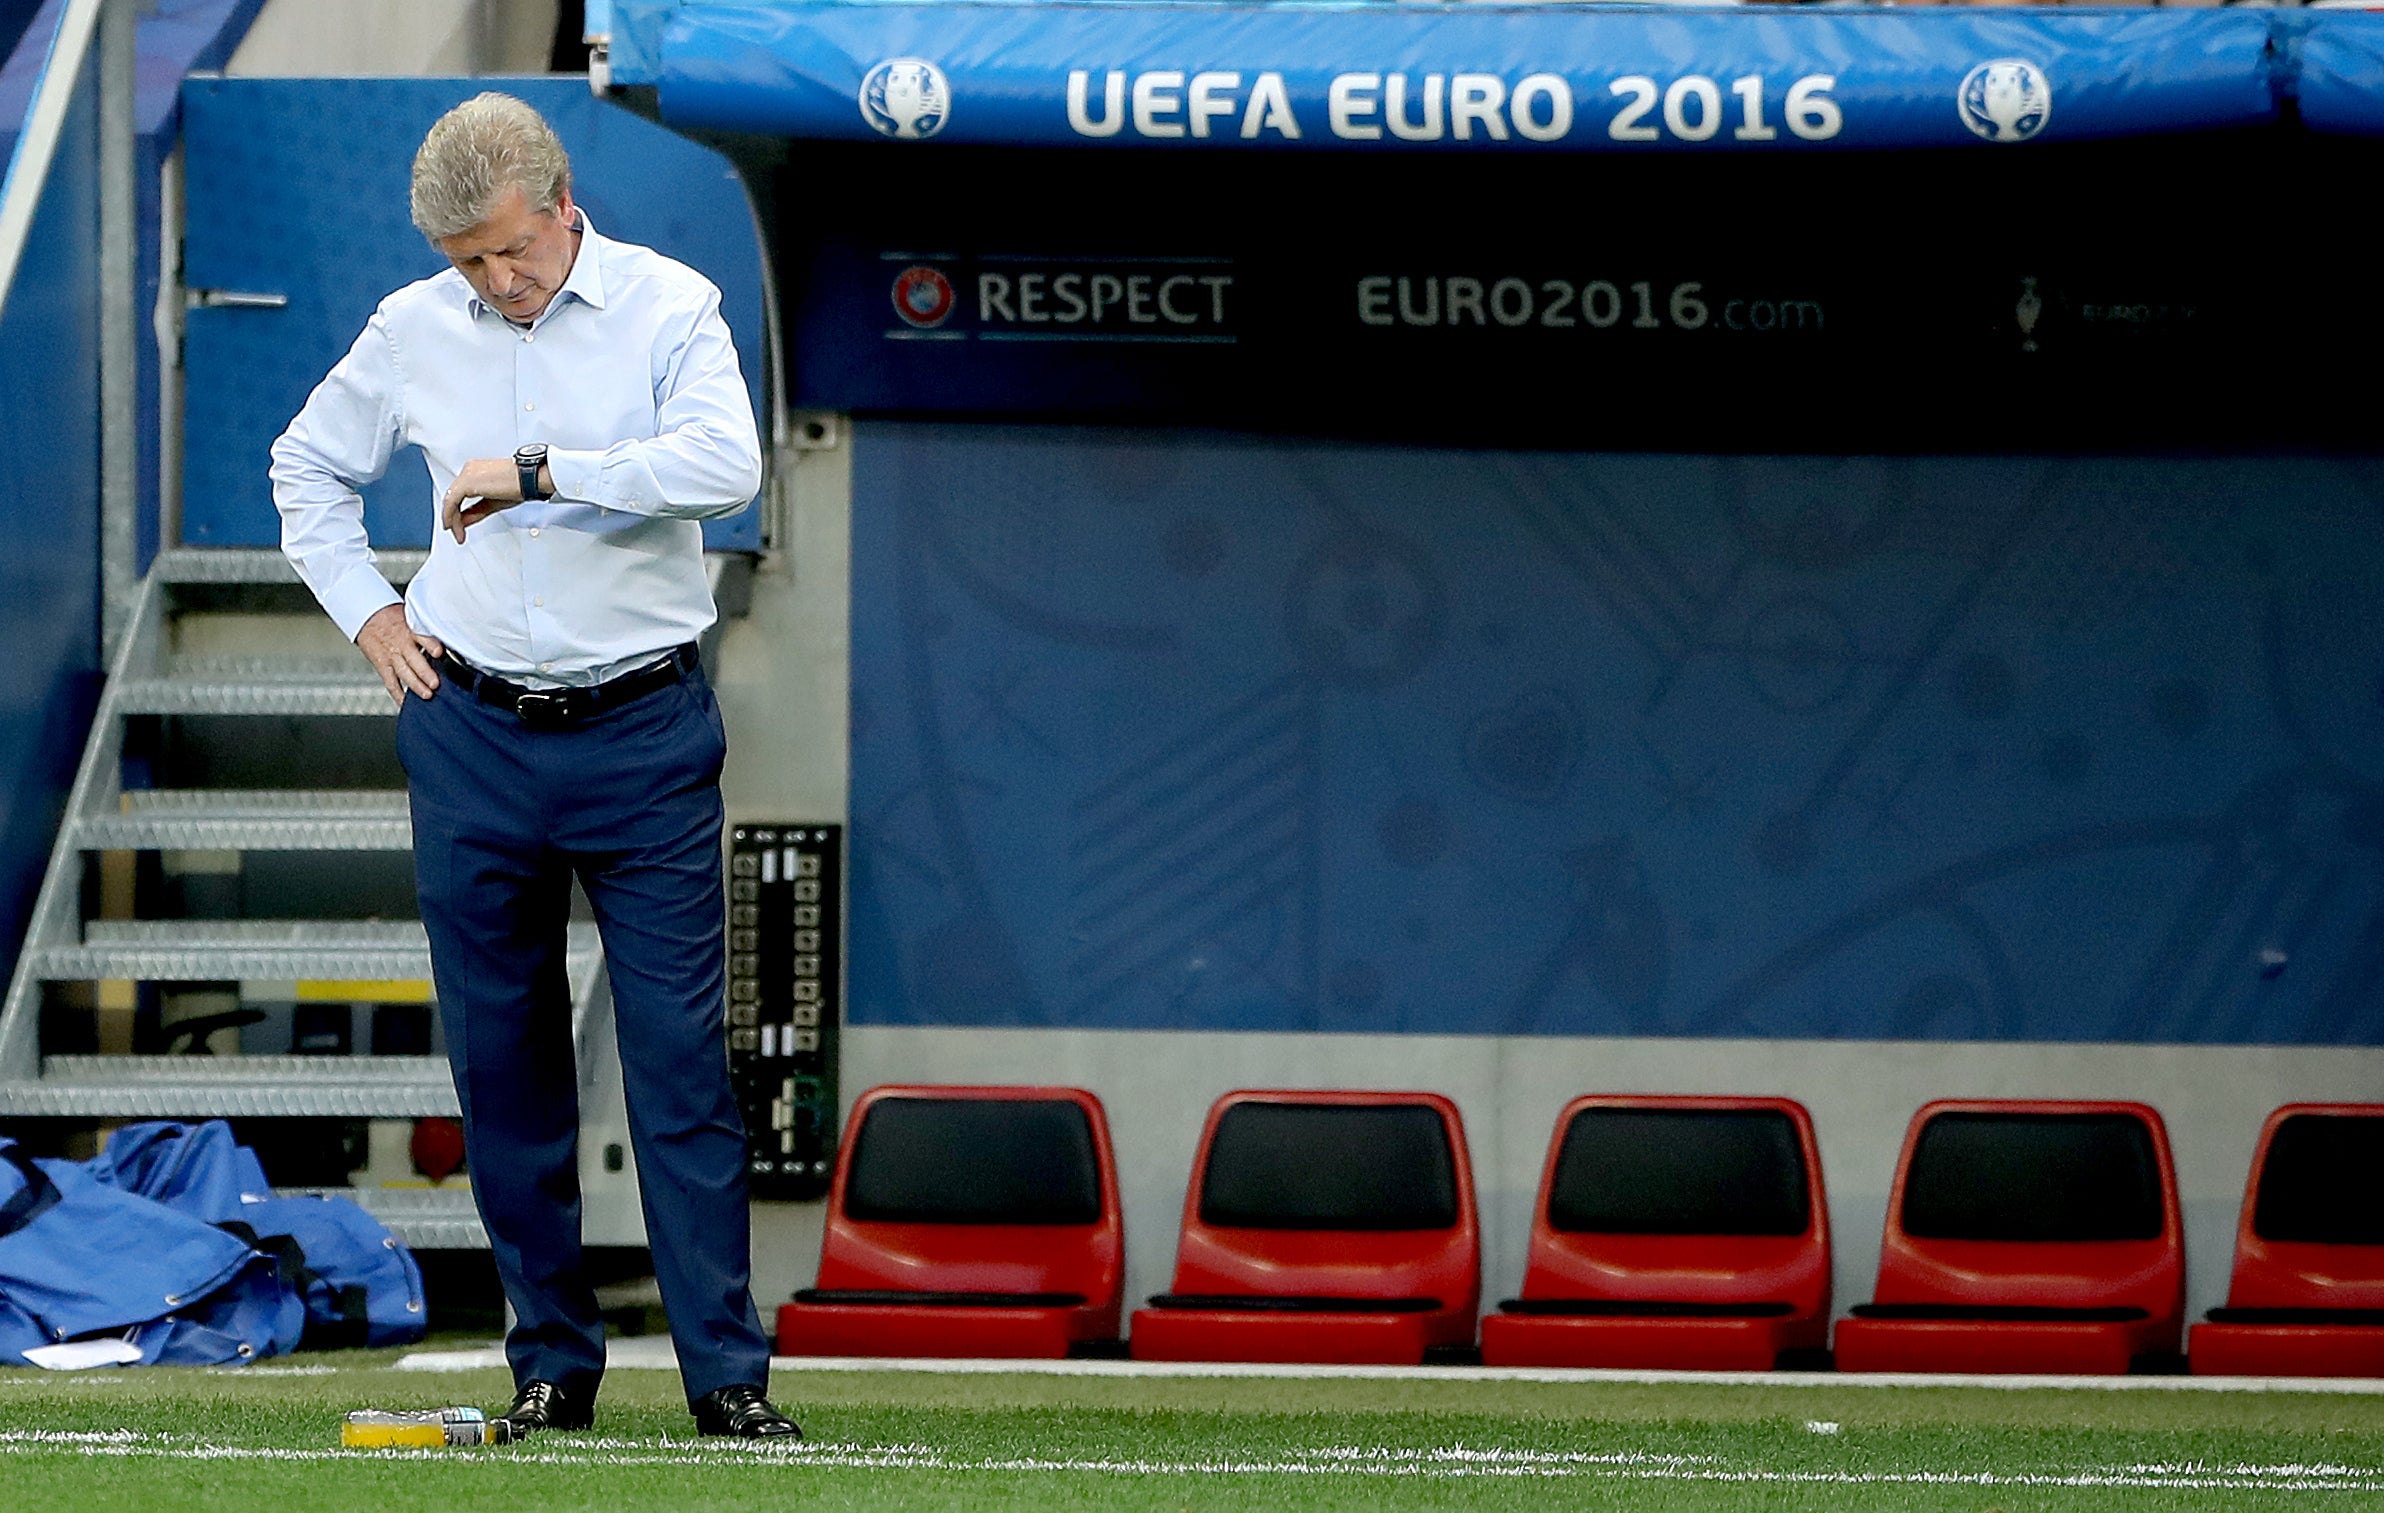 Roy Hodgson’s time as England boss was up following their Euro 2016 defeat by Iceland (Nick Potts/PA)